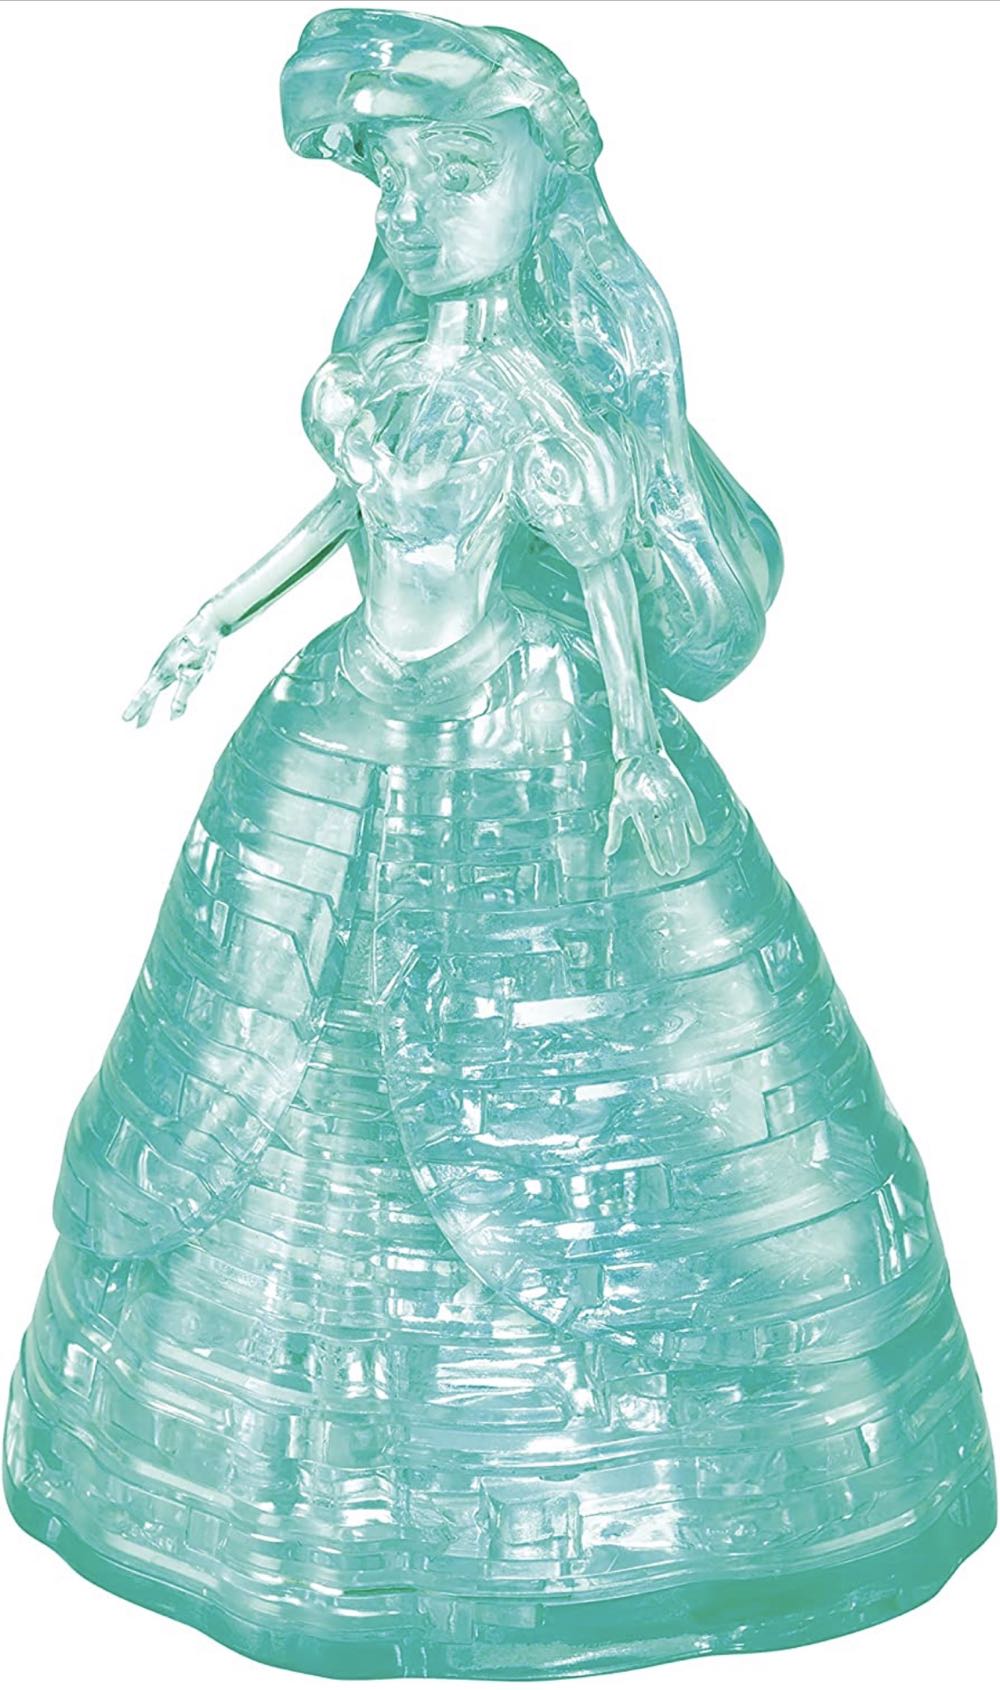 3D Crystal Puzzle Ariel Human (Teal) - Bepuzzled puzzle collectible - Main Image 1